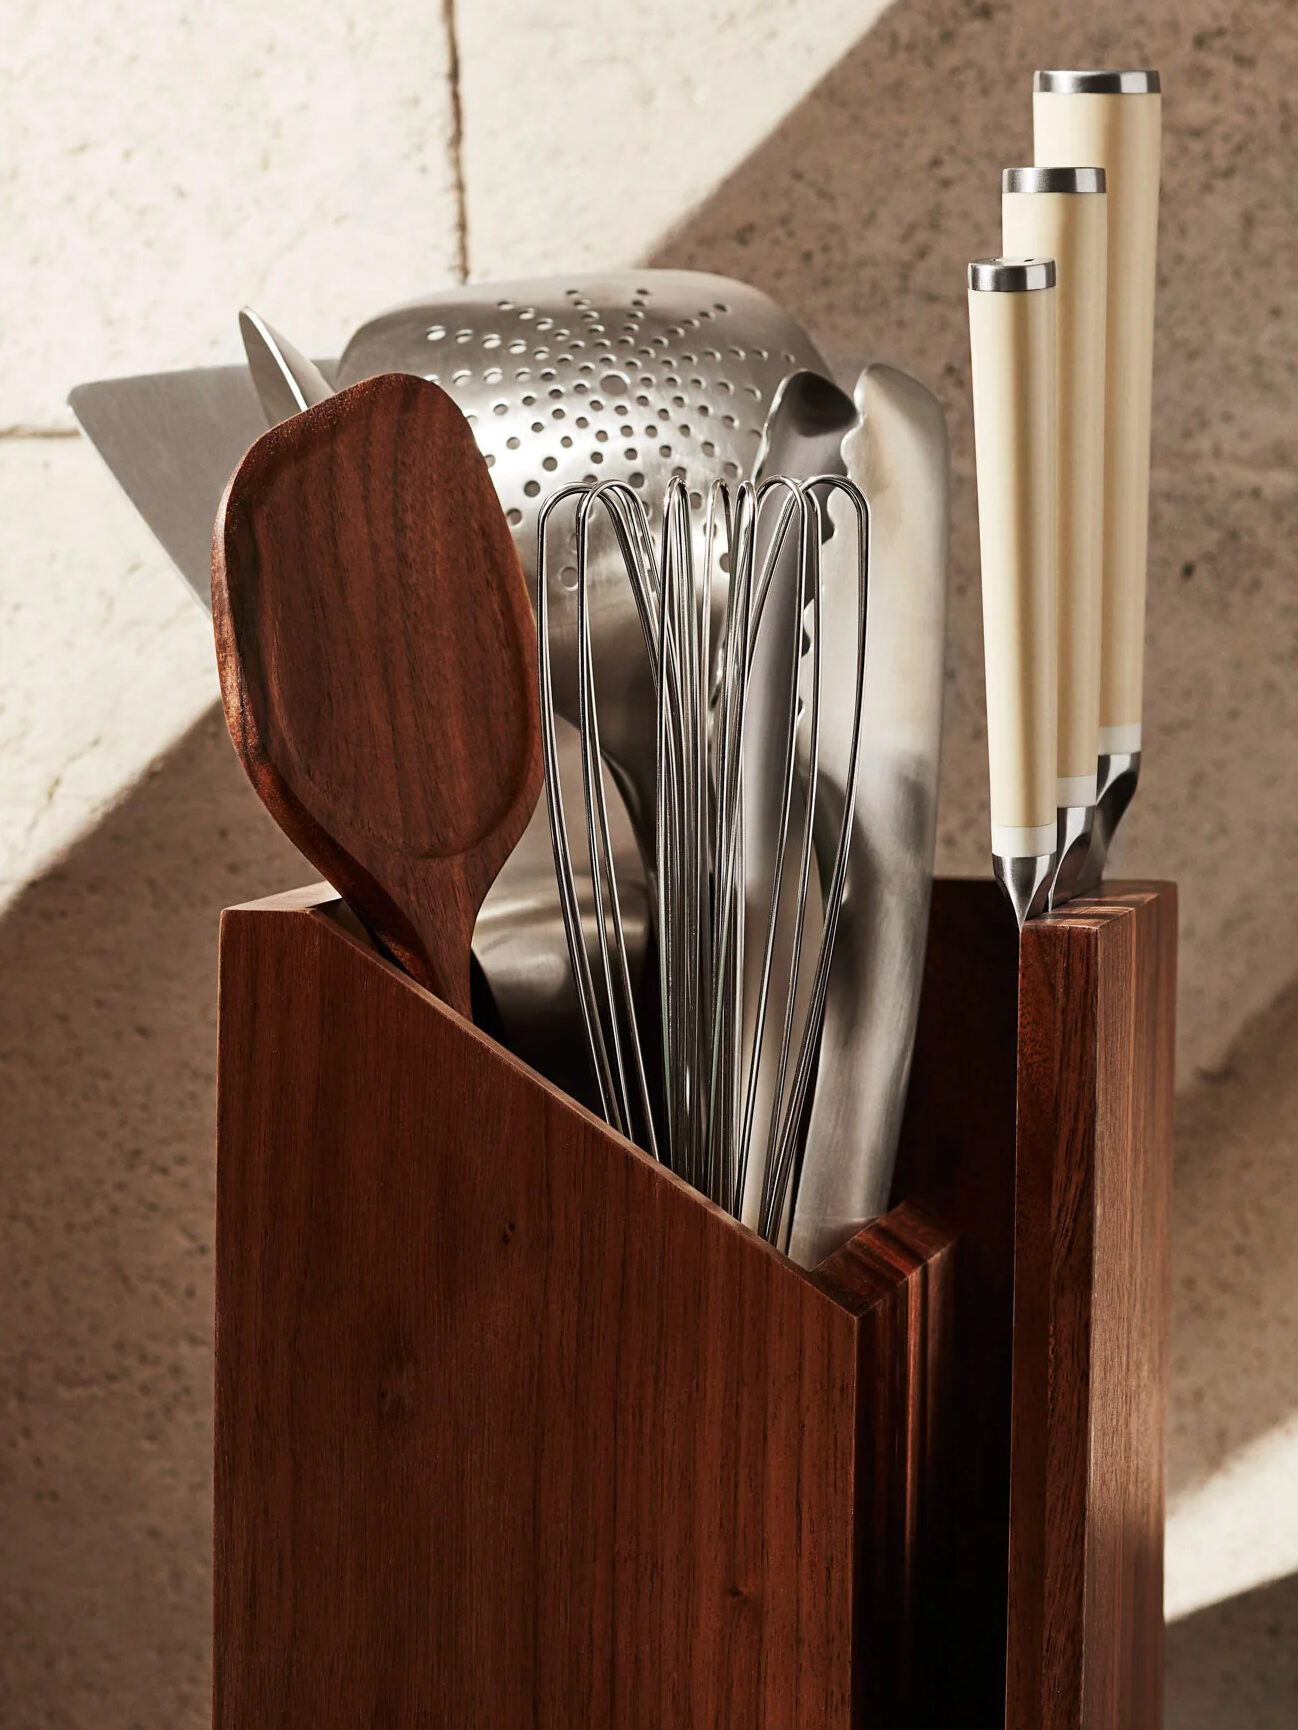 PFAS-Free Wooden Cooking Utensils from Material Kitchen